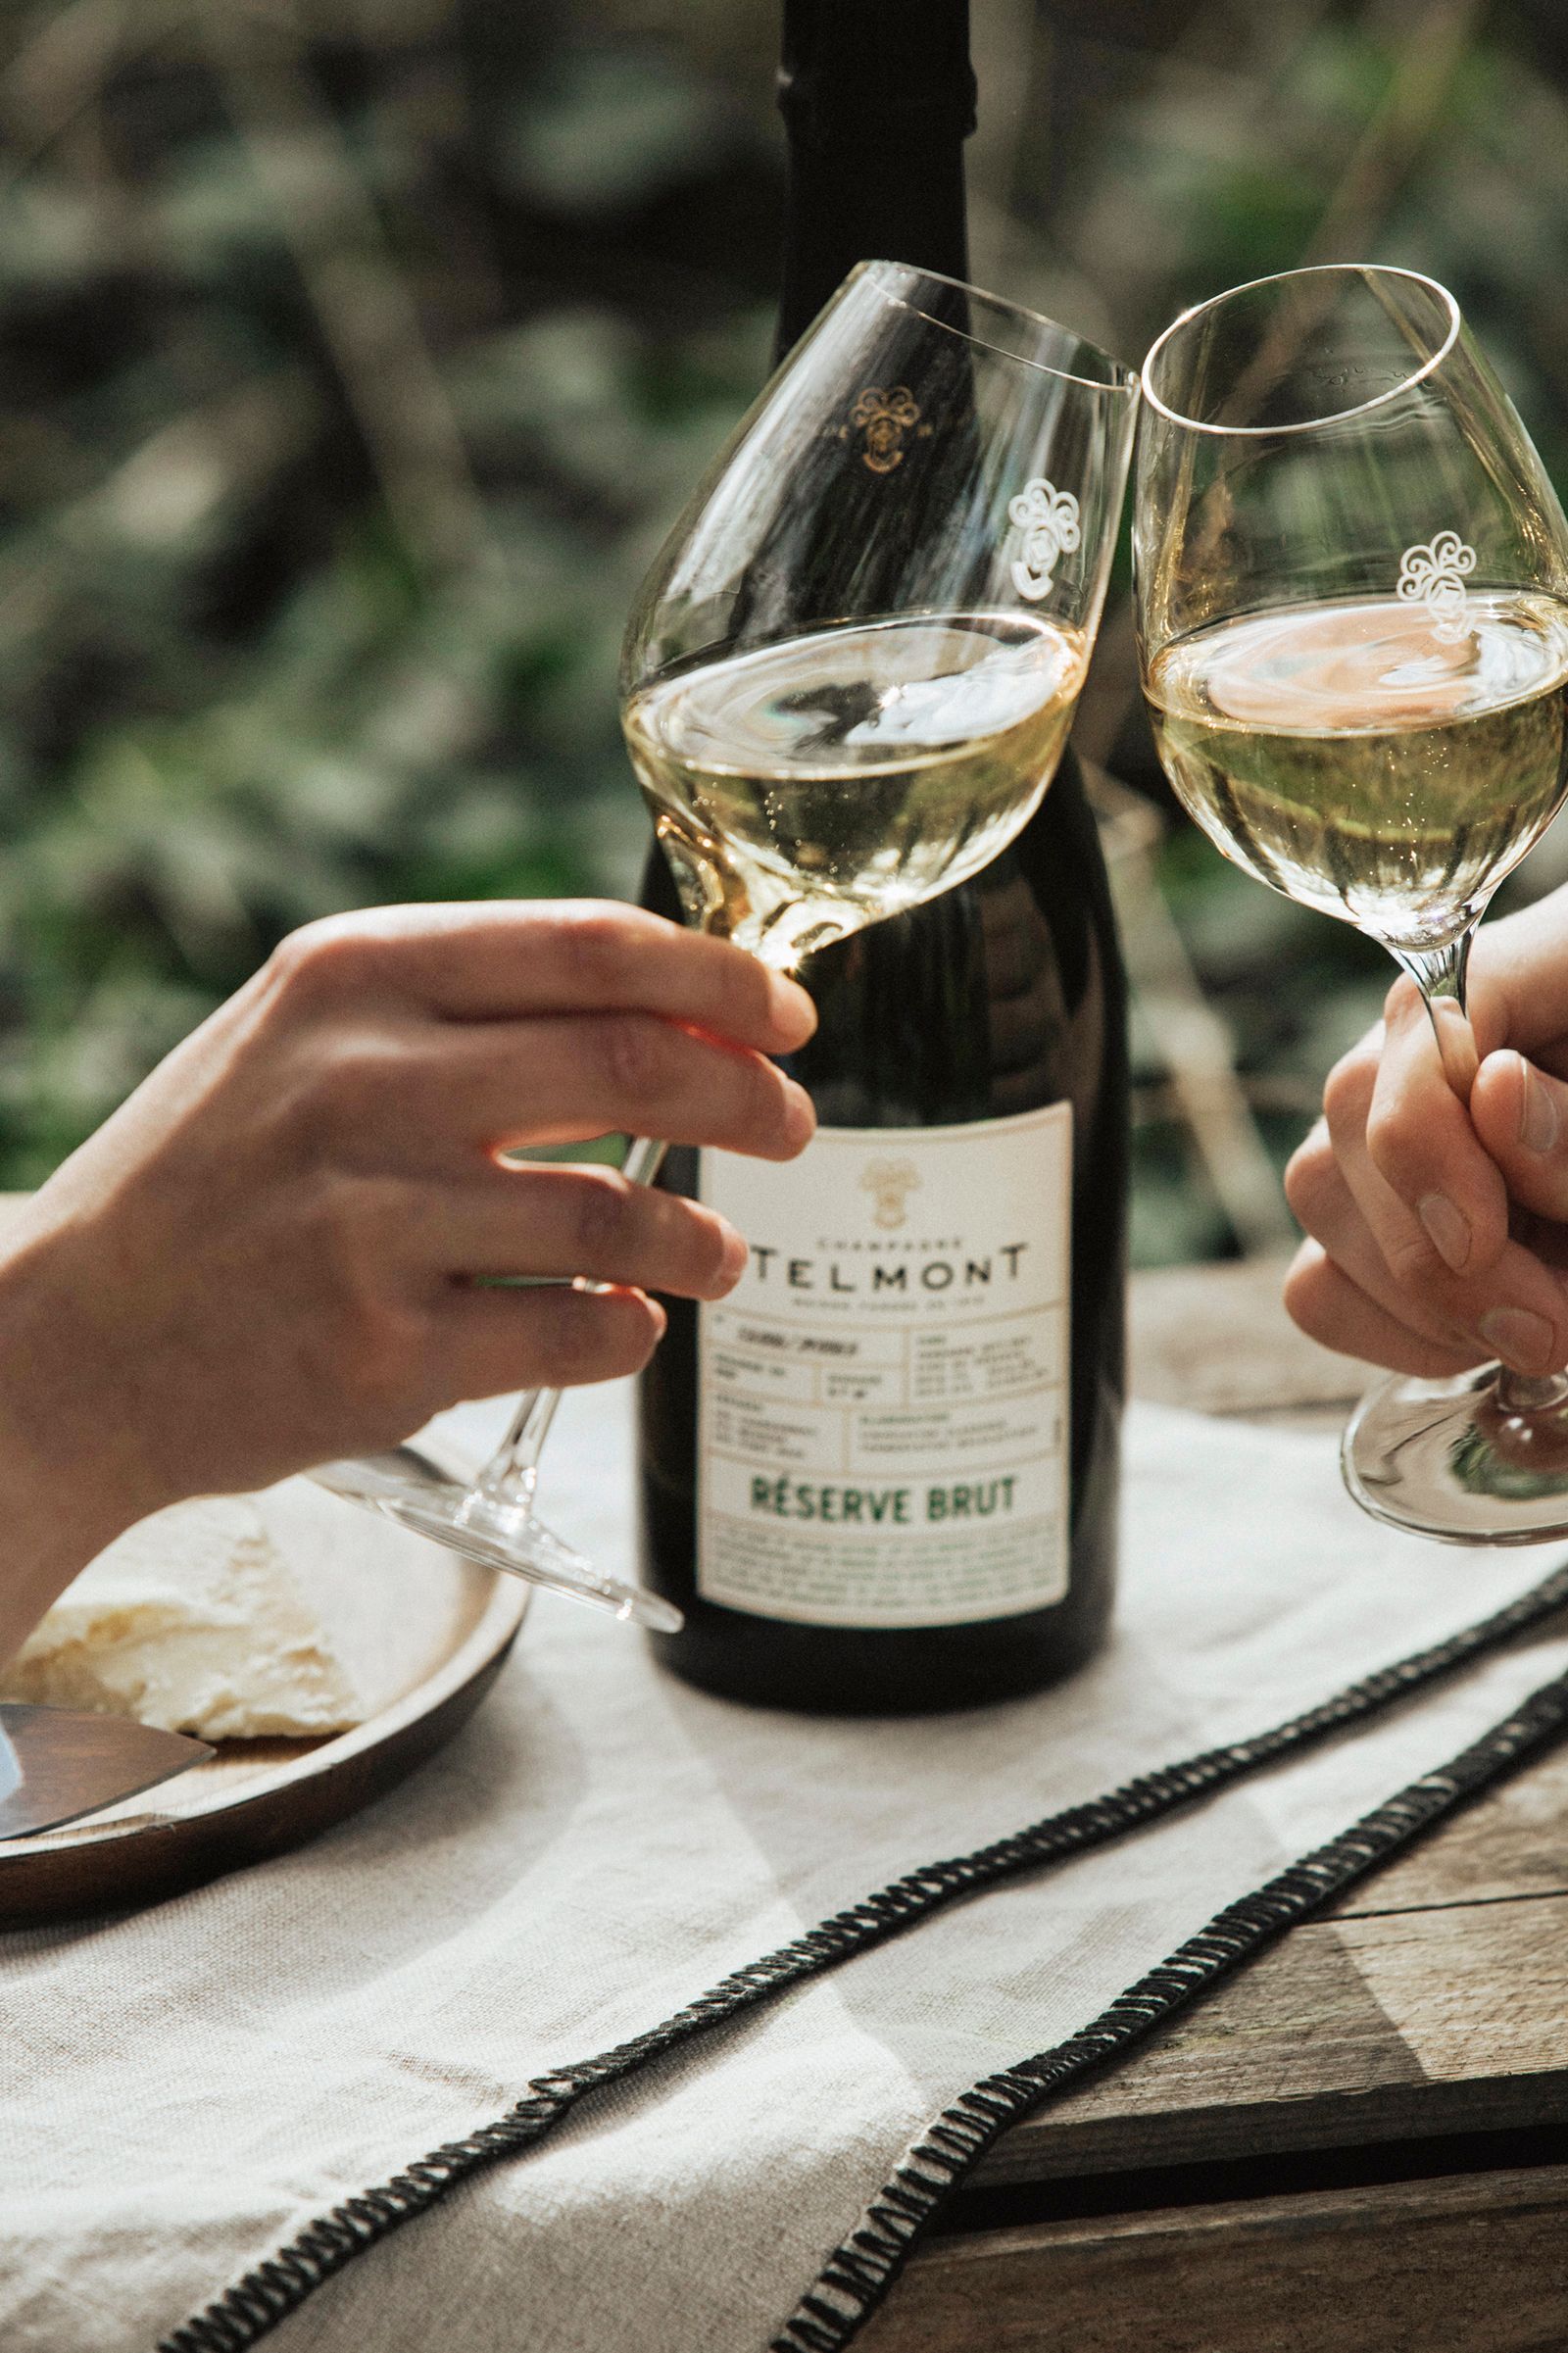 Champagne’s Excellence Stems Above All From The Respect For Nature